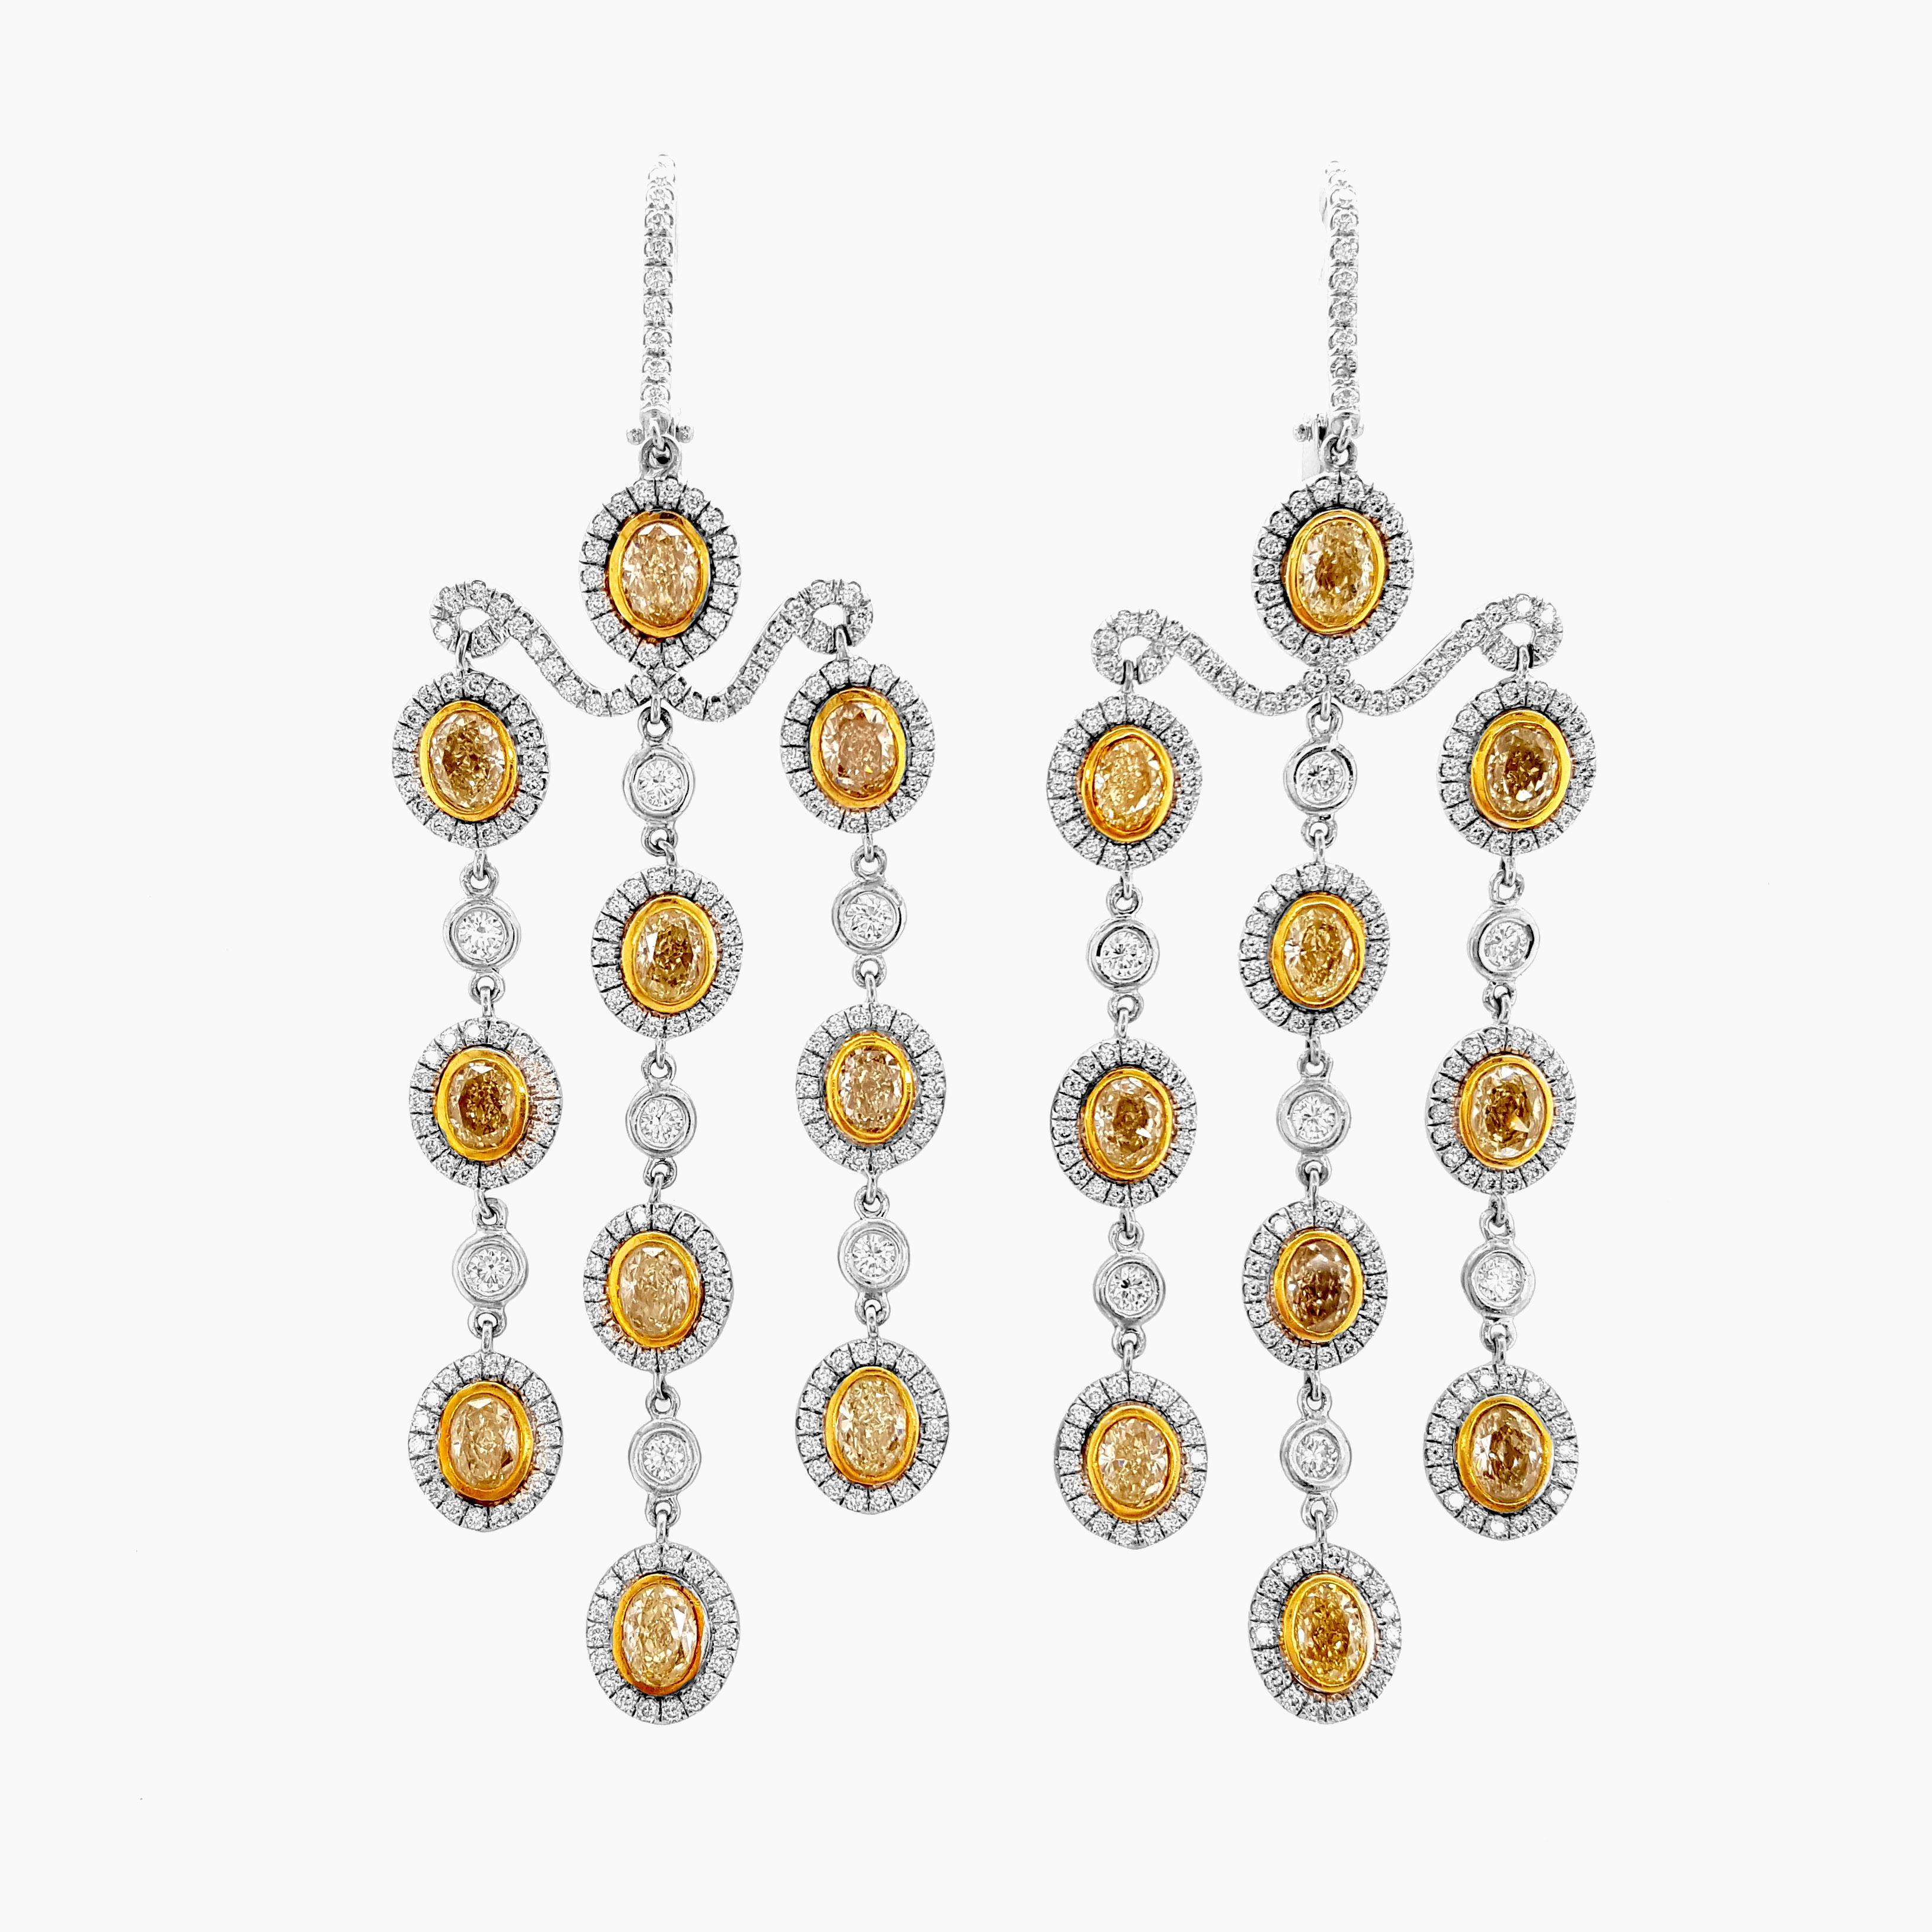 Presenting our exquisite matched pair of Chandelier Drop Earrings, adorned with a captivating combination of 7.23 Carat Light Yellow and White Diamonds. Handcrafted and set in polished 18K Yellow and White Gold, these earrings emanate a timeless